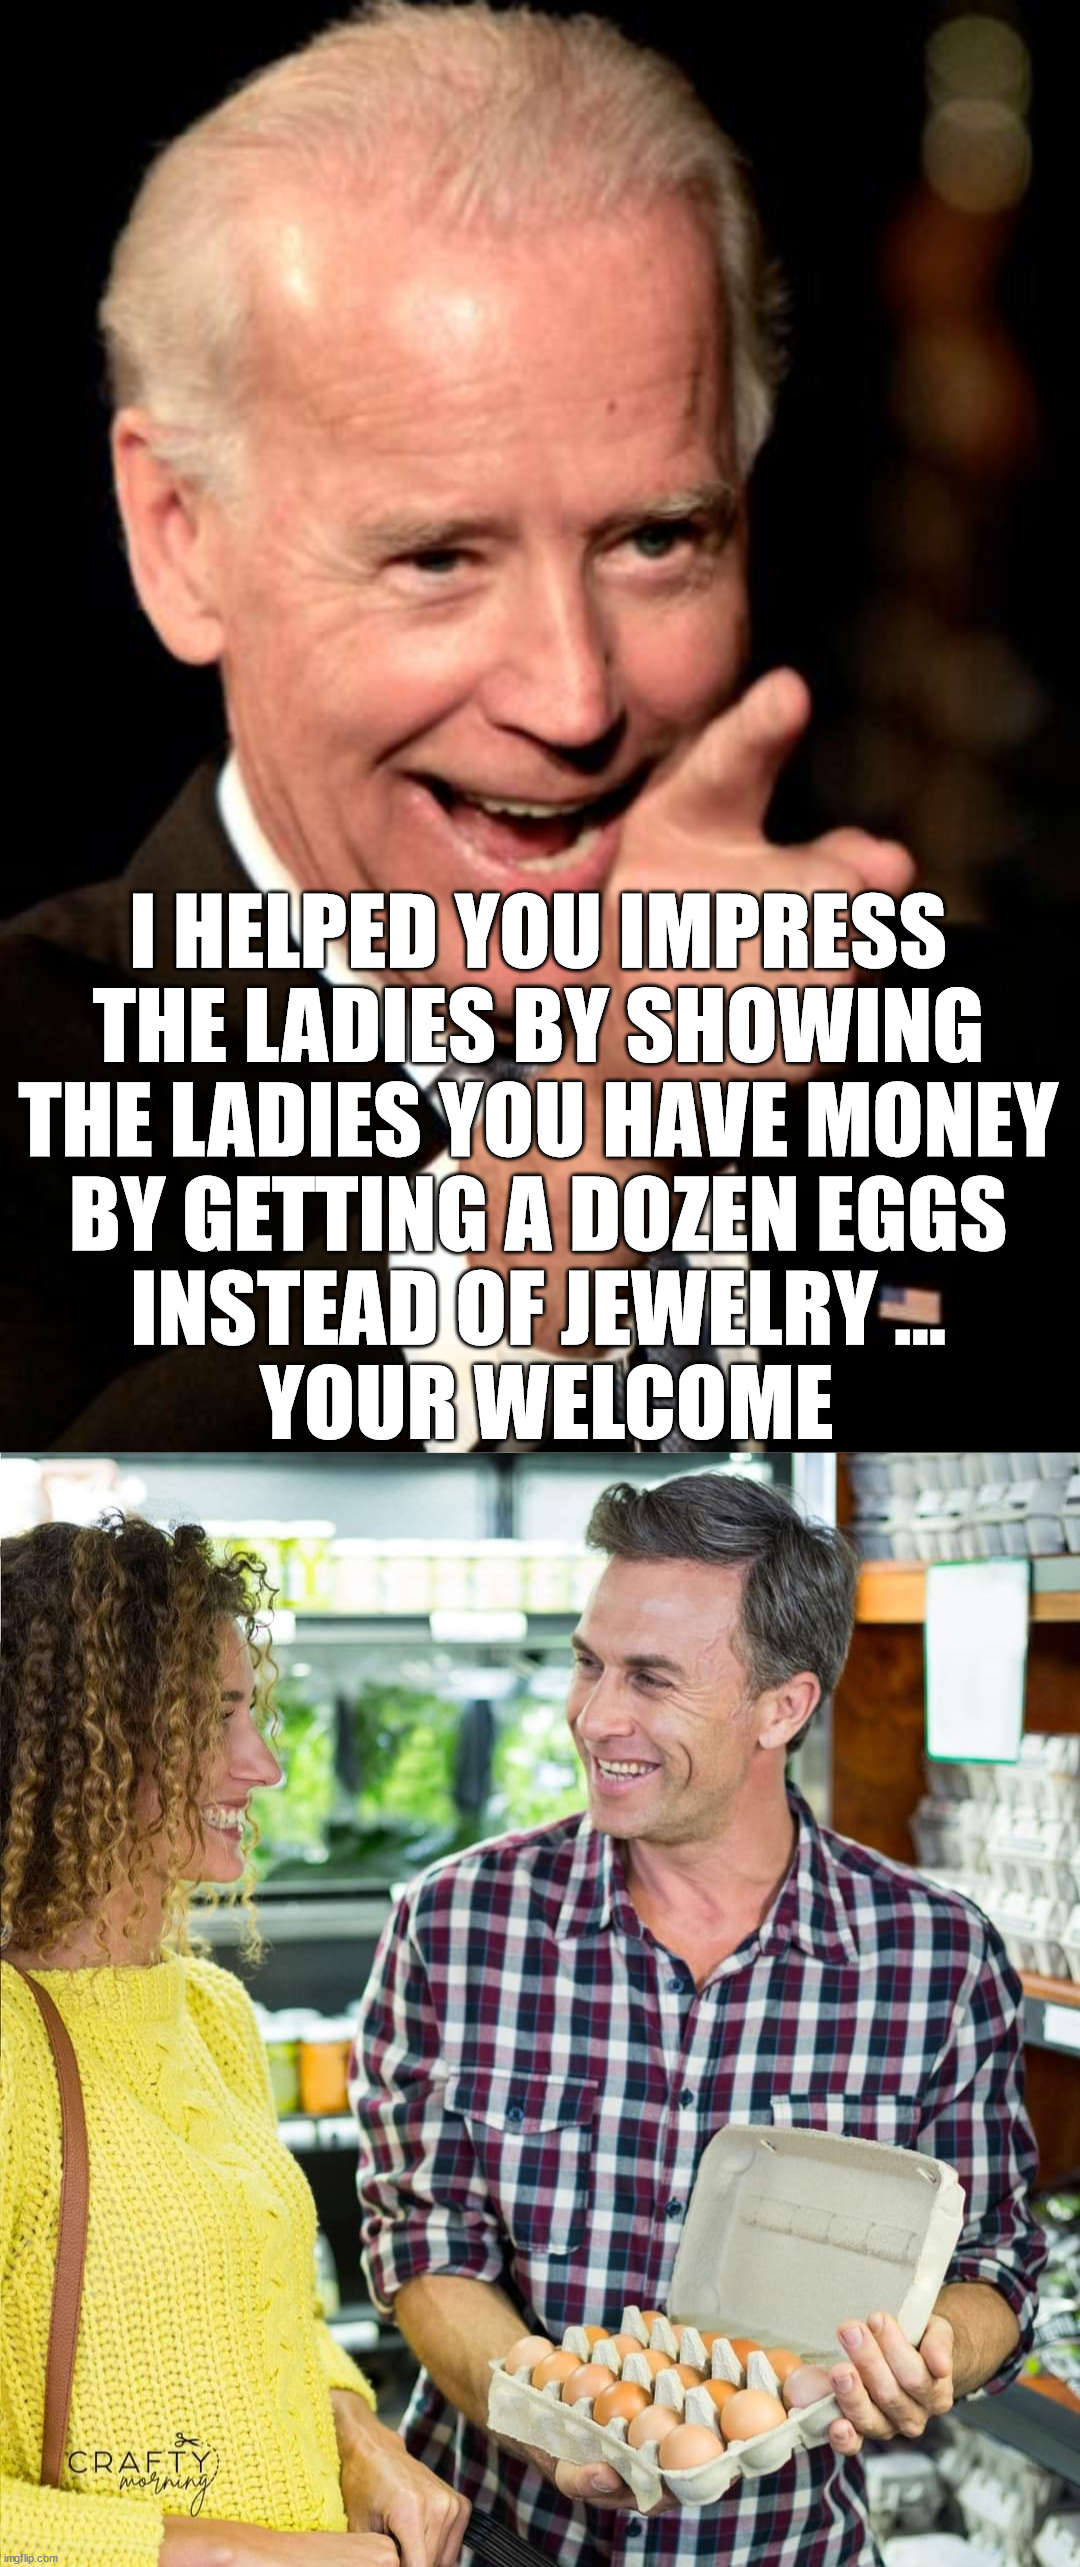  I HELPED YOU IMPRESS 
THE LADIES BY SHOWING 
THE LADIES YOU HAVE MONEY 
BY GETTING A DOZEN EGGS 
INSTEAD OF JEWELRY ... 
YOUR WELCOME | image tagged in memes,smilin biden | made w/ Imgflip meme maker